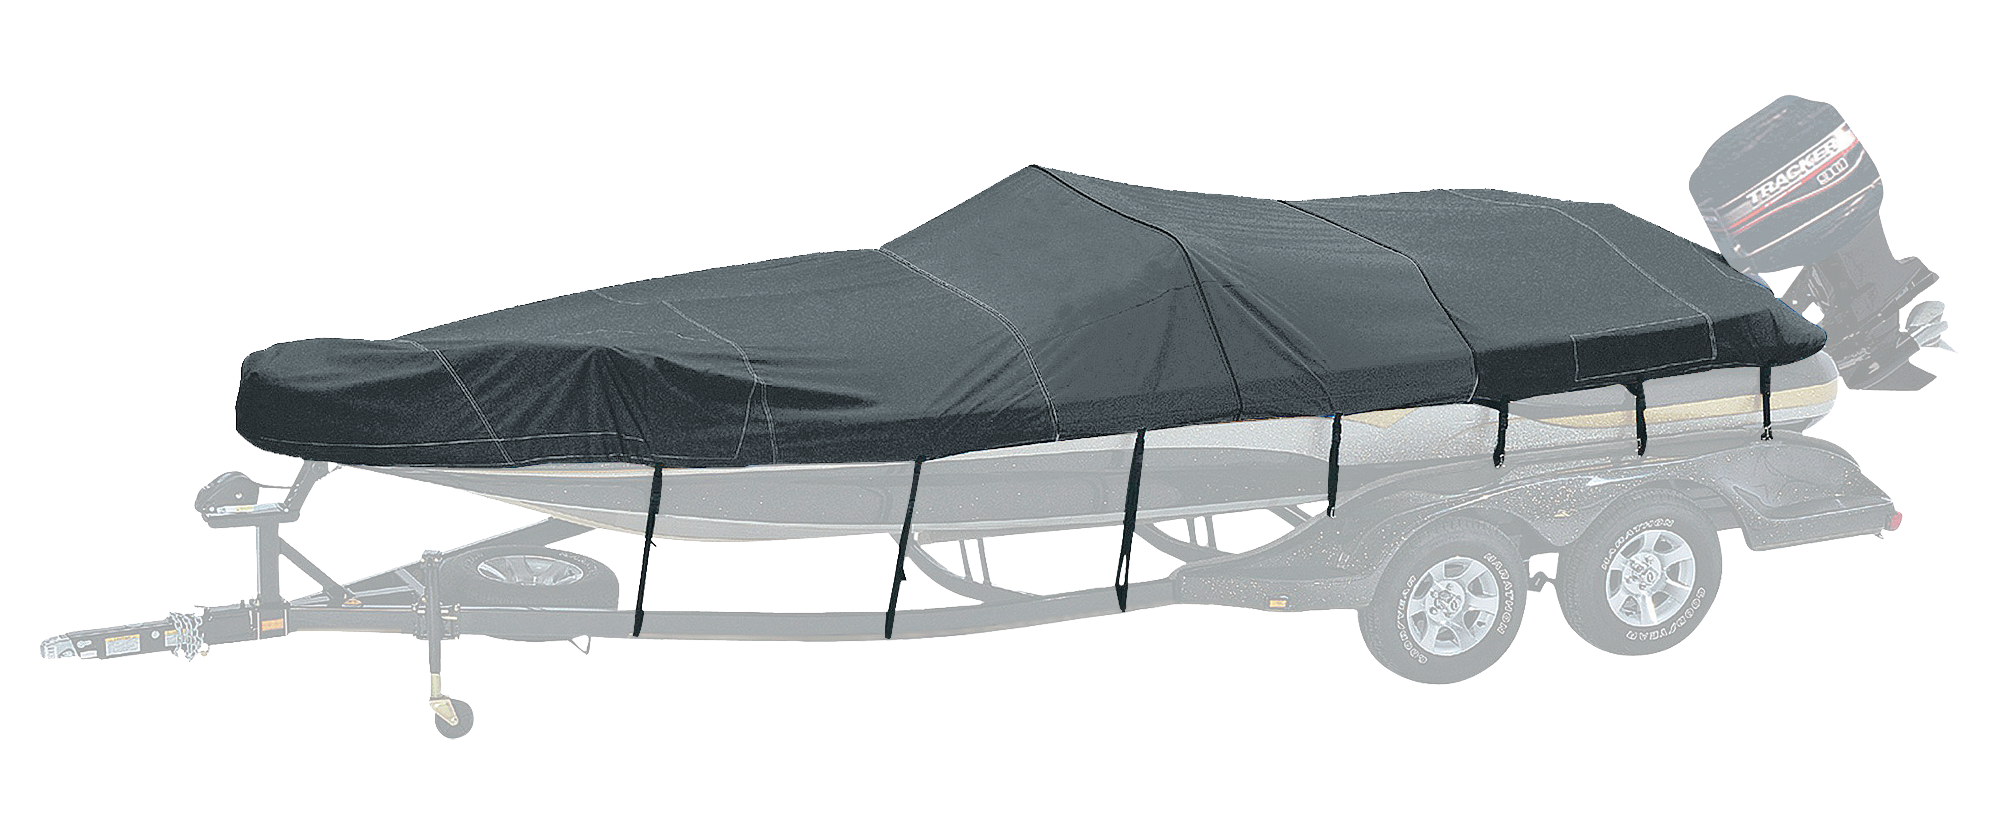 Bass Pro Shops Exact Fit Boat Cover by Westland - Tahoe - '04-'05 254 DB Standard I/O w/Ext. - Charcoal